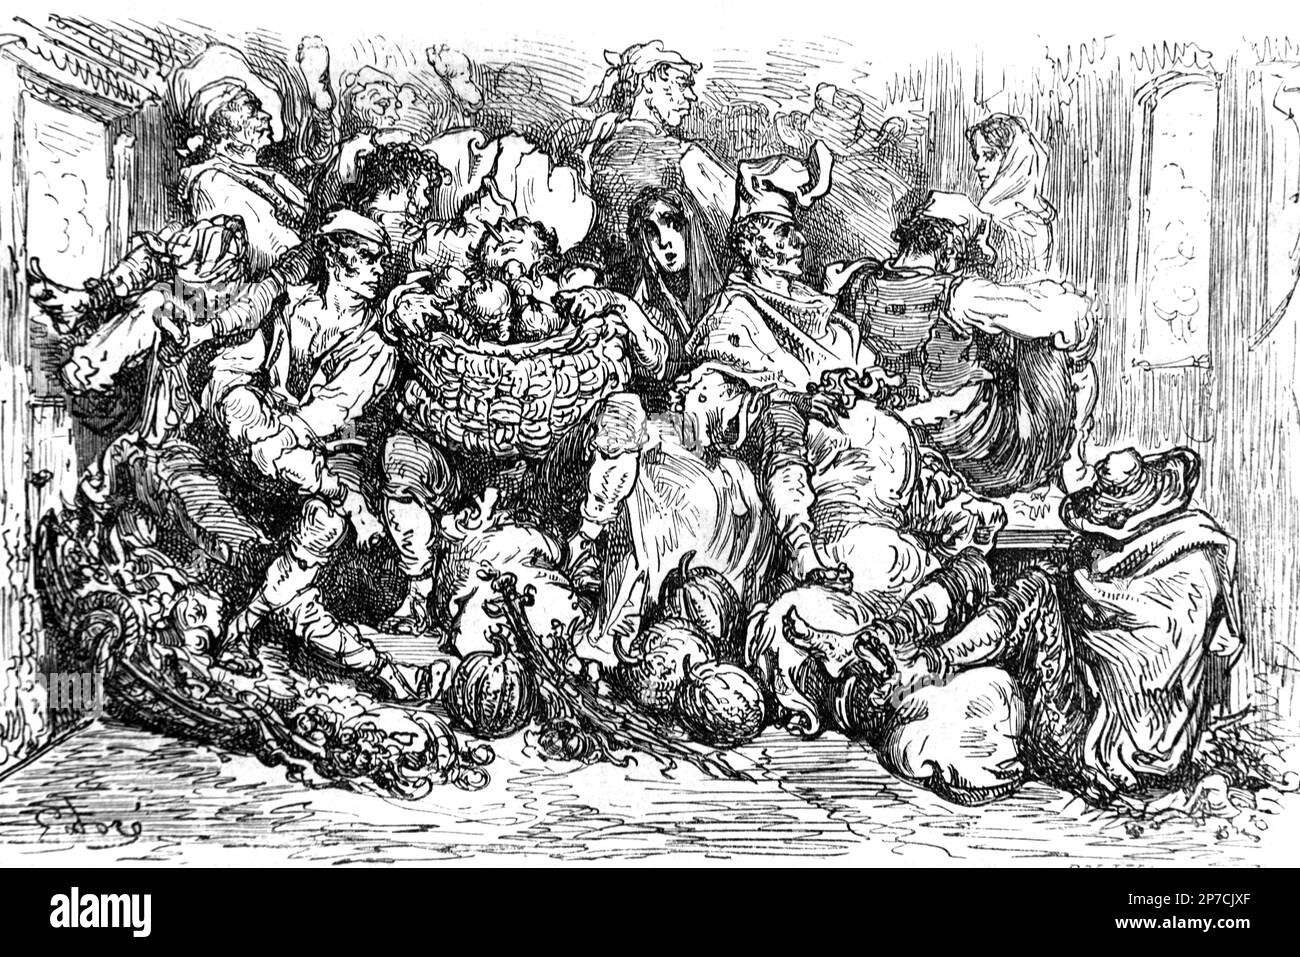 Train Passengers in a Crowded or Overcrowded Third Class Carriage of Train on Spanish Railways Spain. Illustration by Gustave Doré. Vintage or Historical Engraving or Illustration 1862 Stock Photo